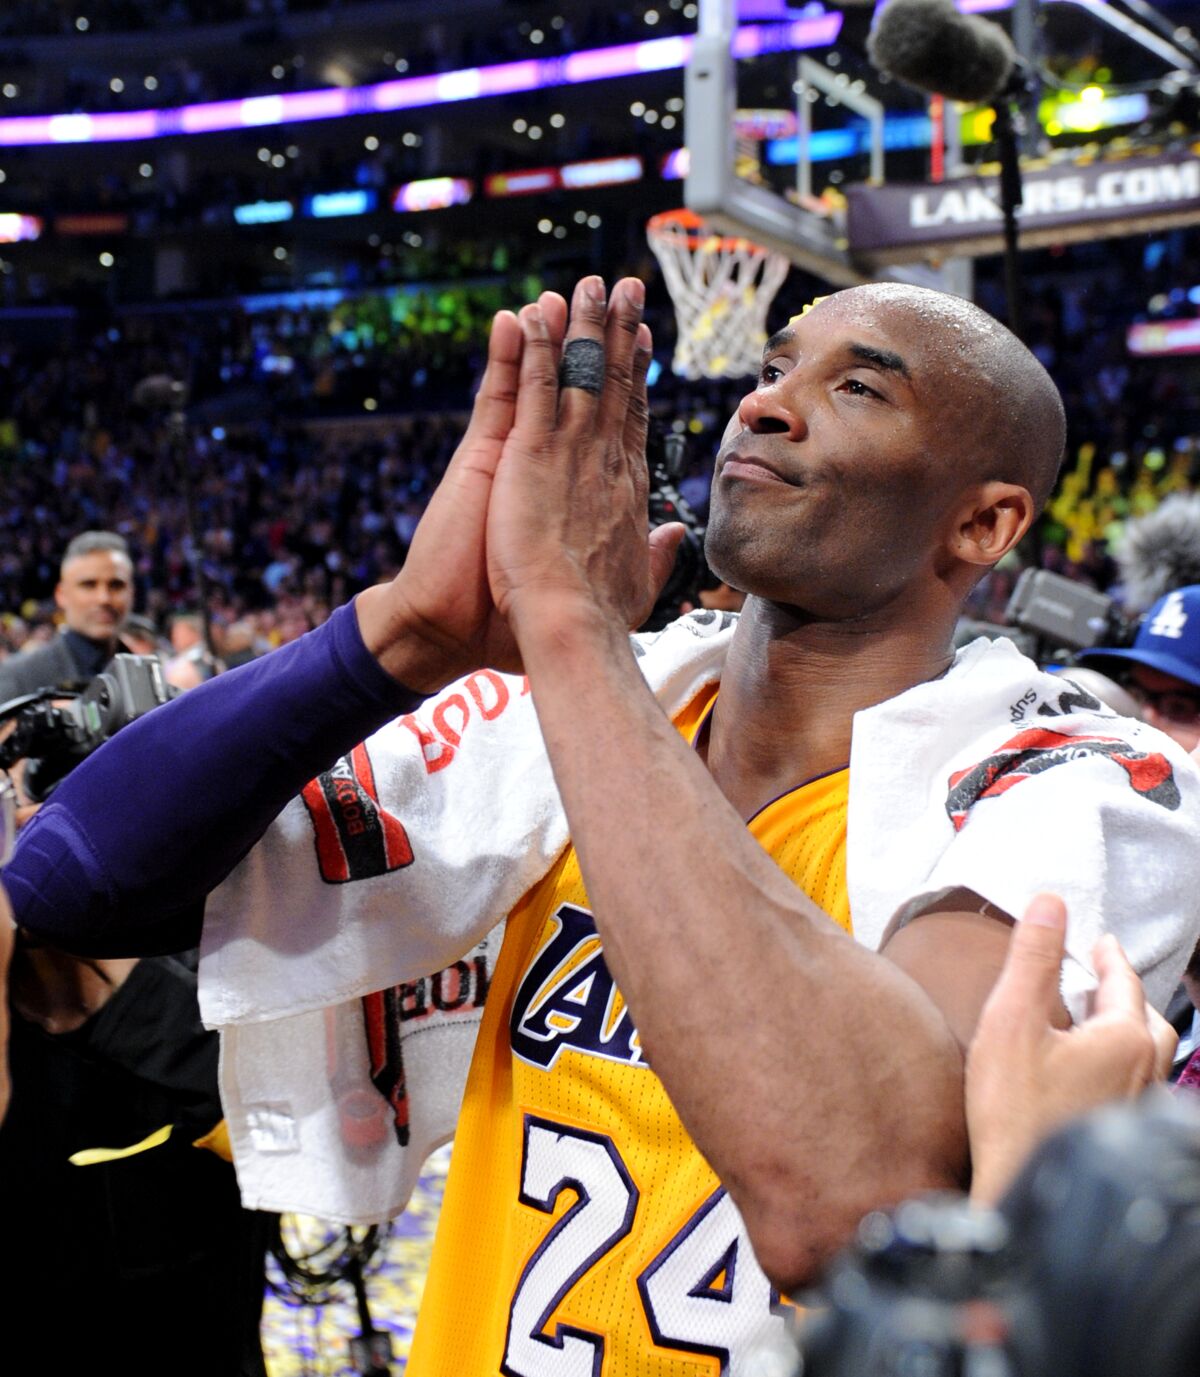 Lakers star Kobe Bryant gestures toward the crowd at Staples Center following the final game of his career on April 13, 2016.